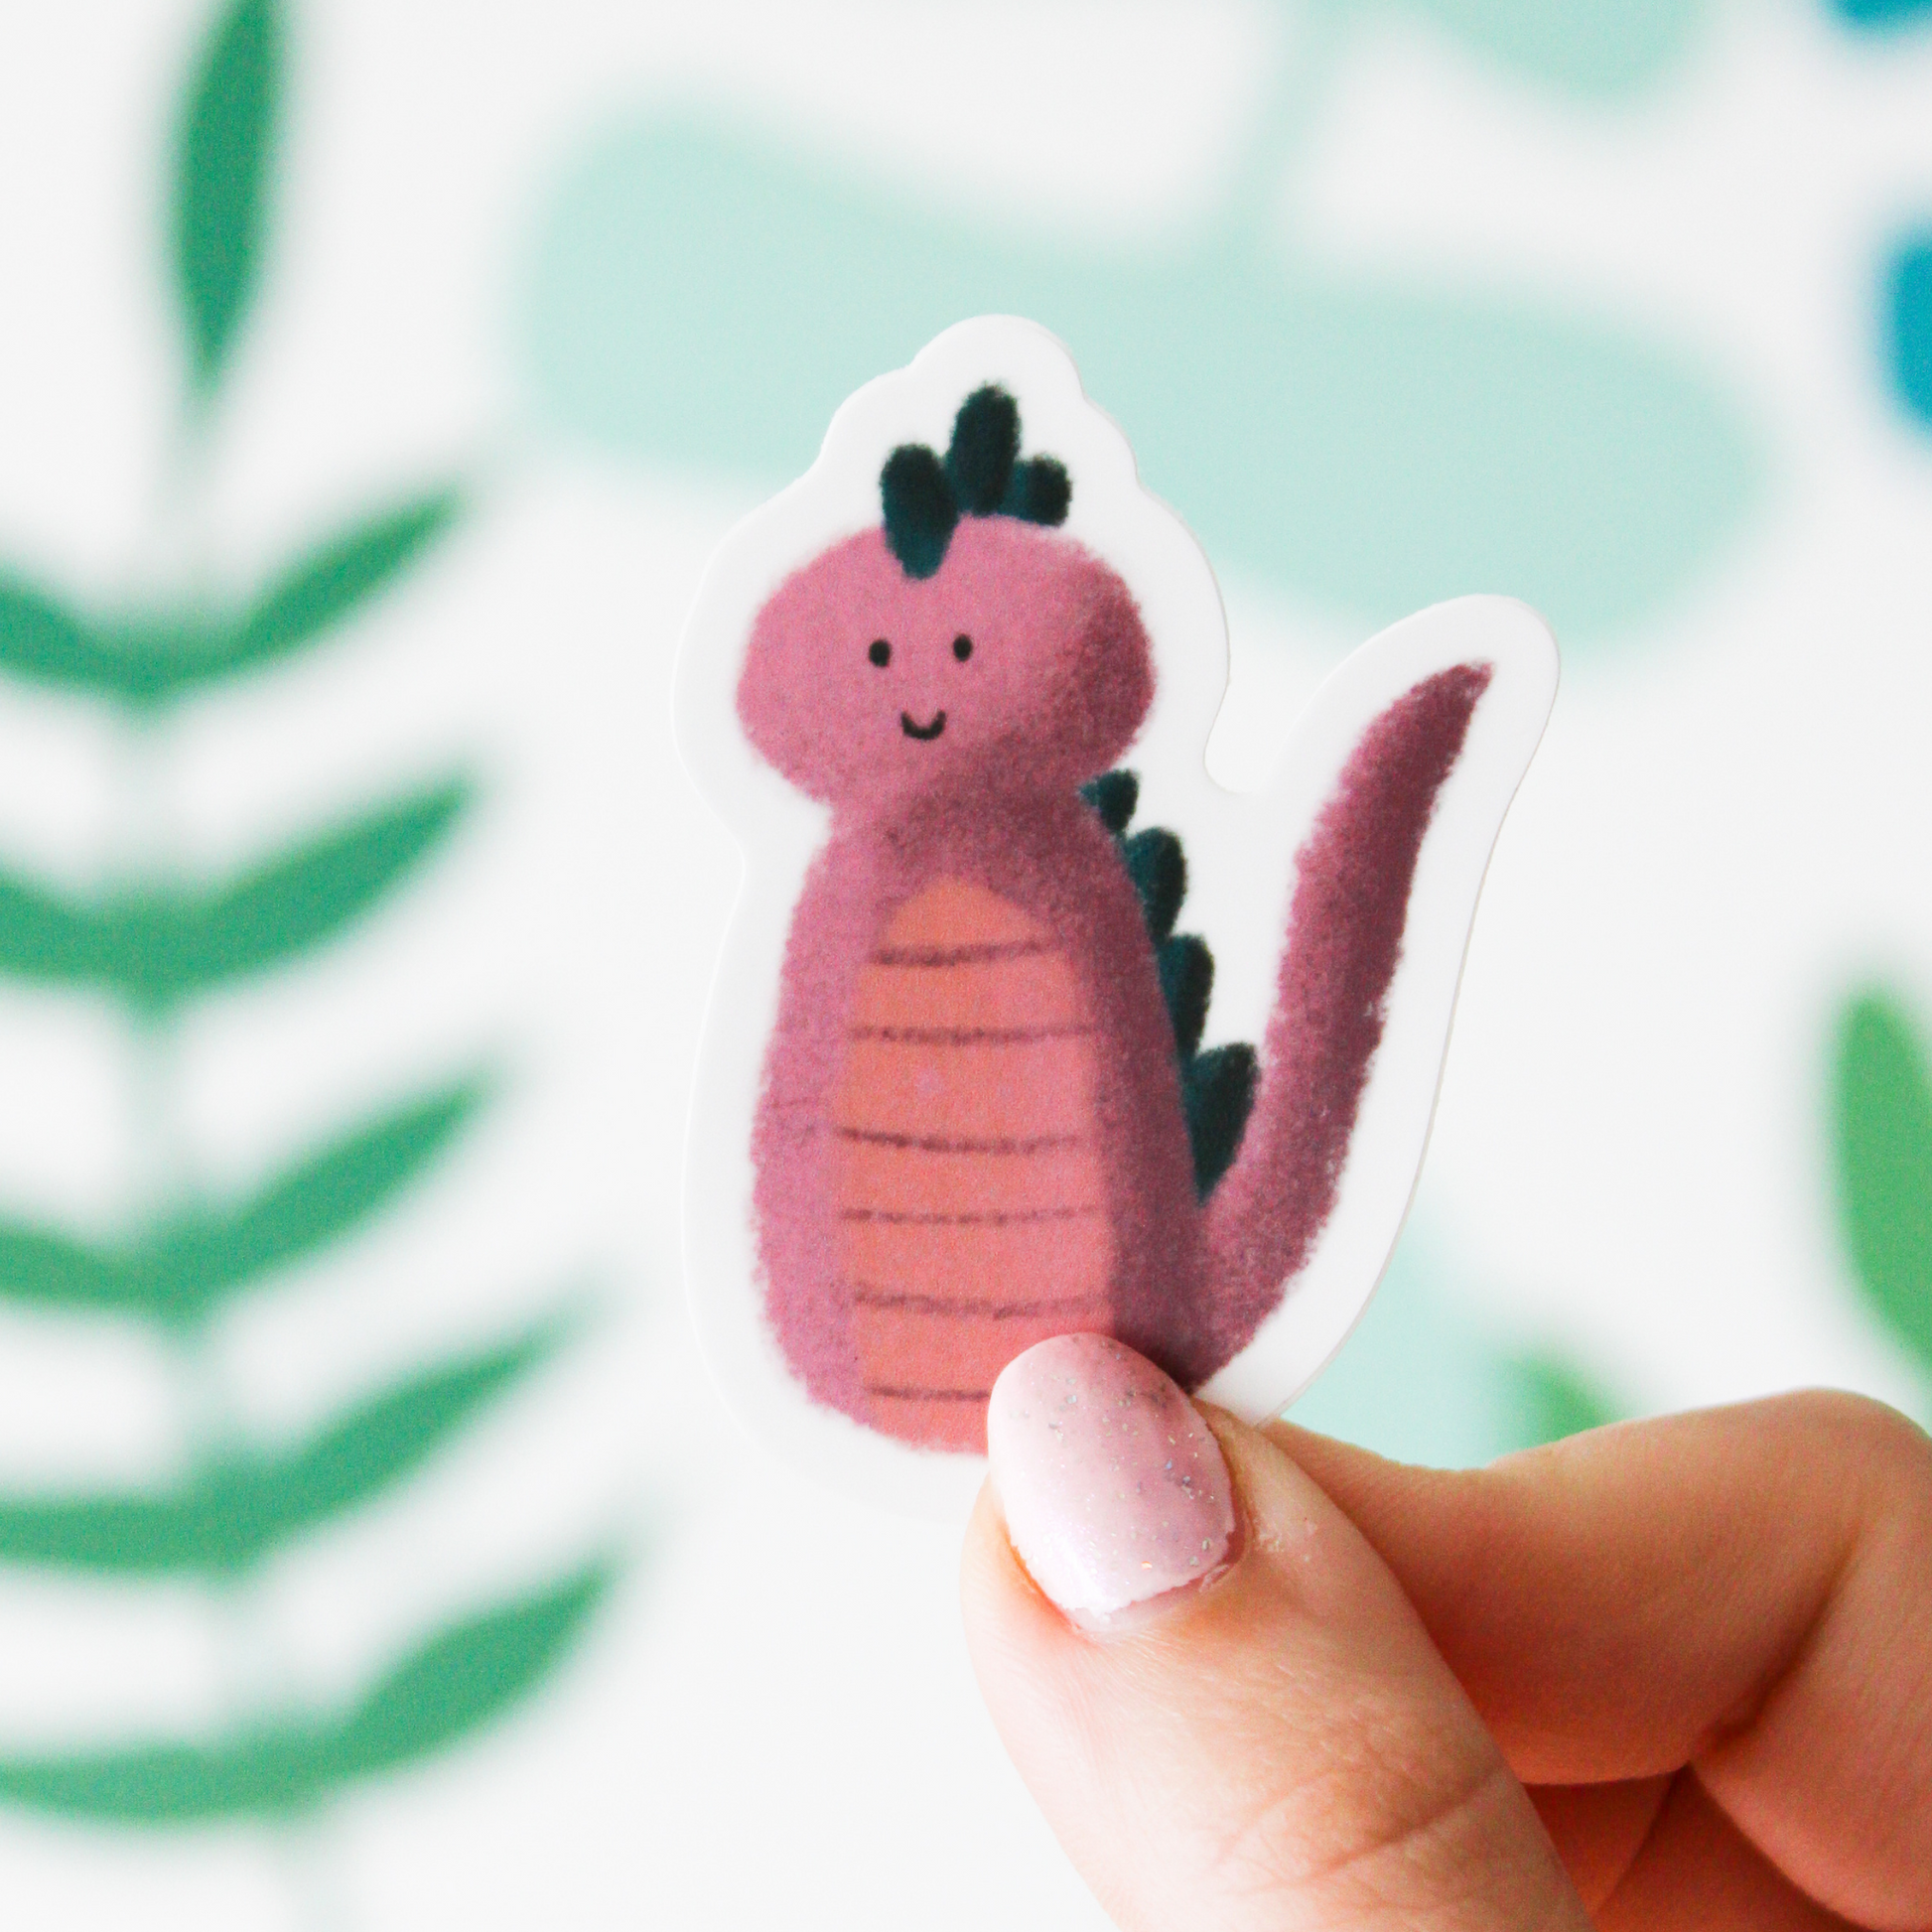 A hand holding a sticker that has a smiling pink monster  on it with dark green spikes and a long pink tail. The background is a blurred leaf pattern. 